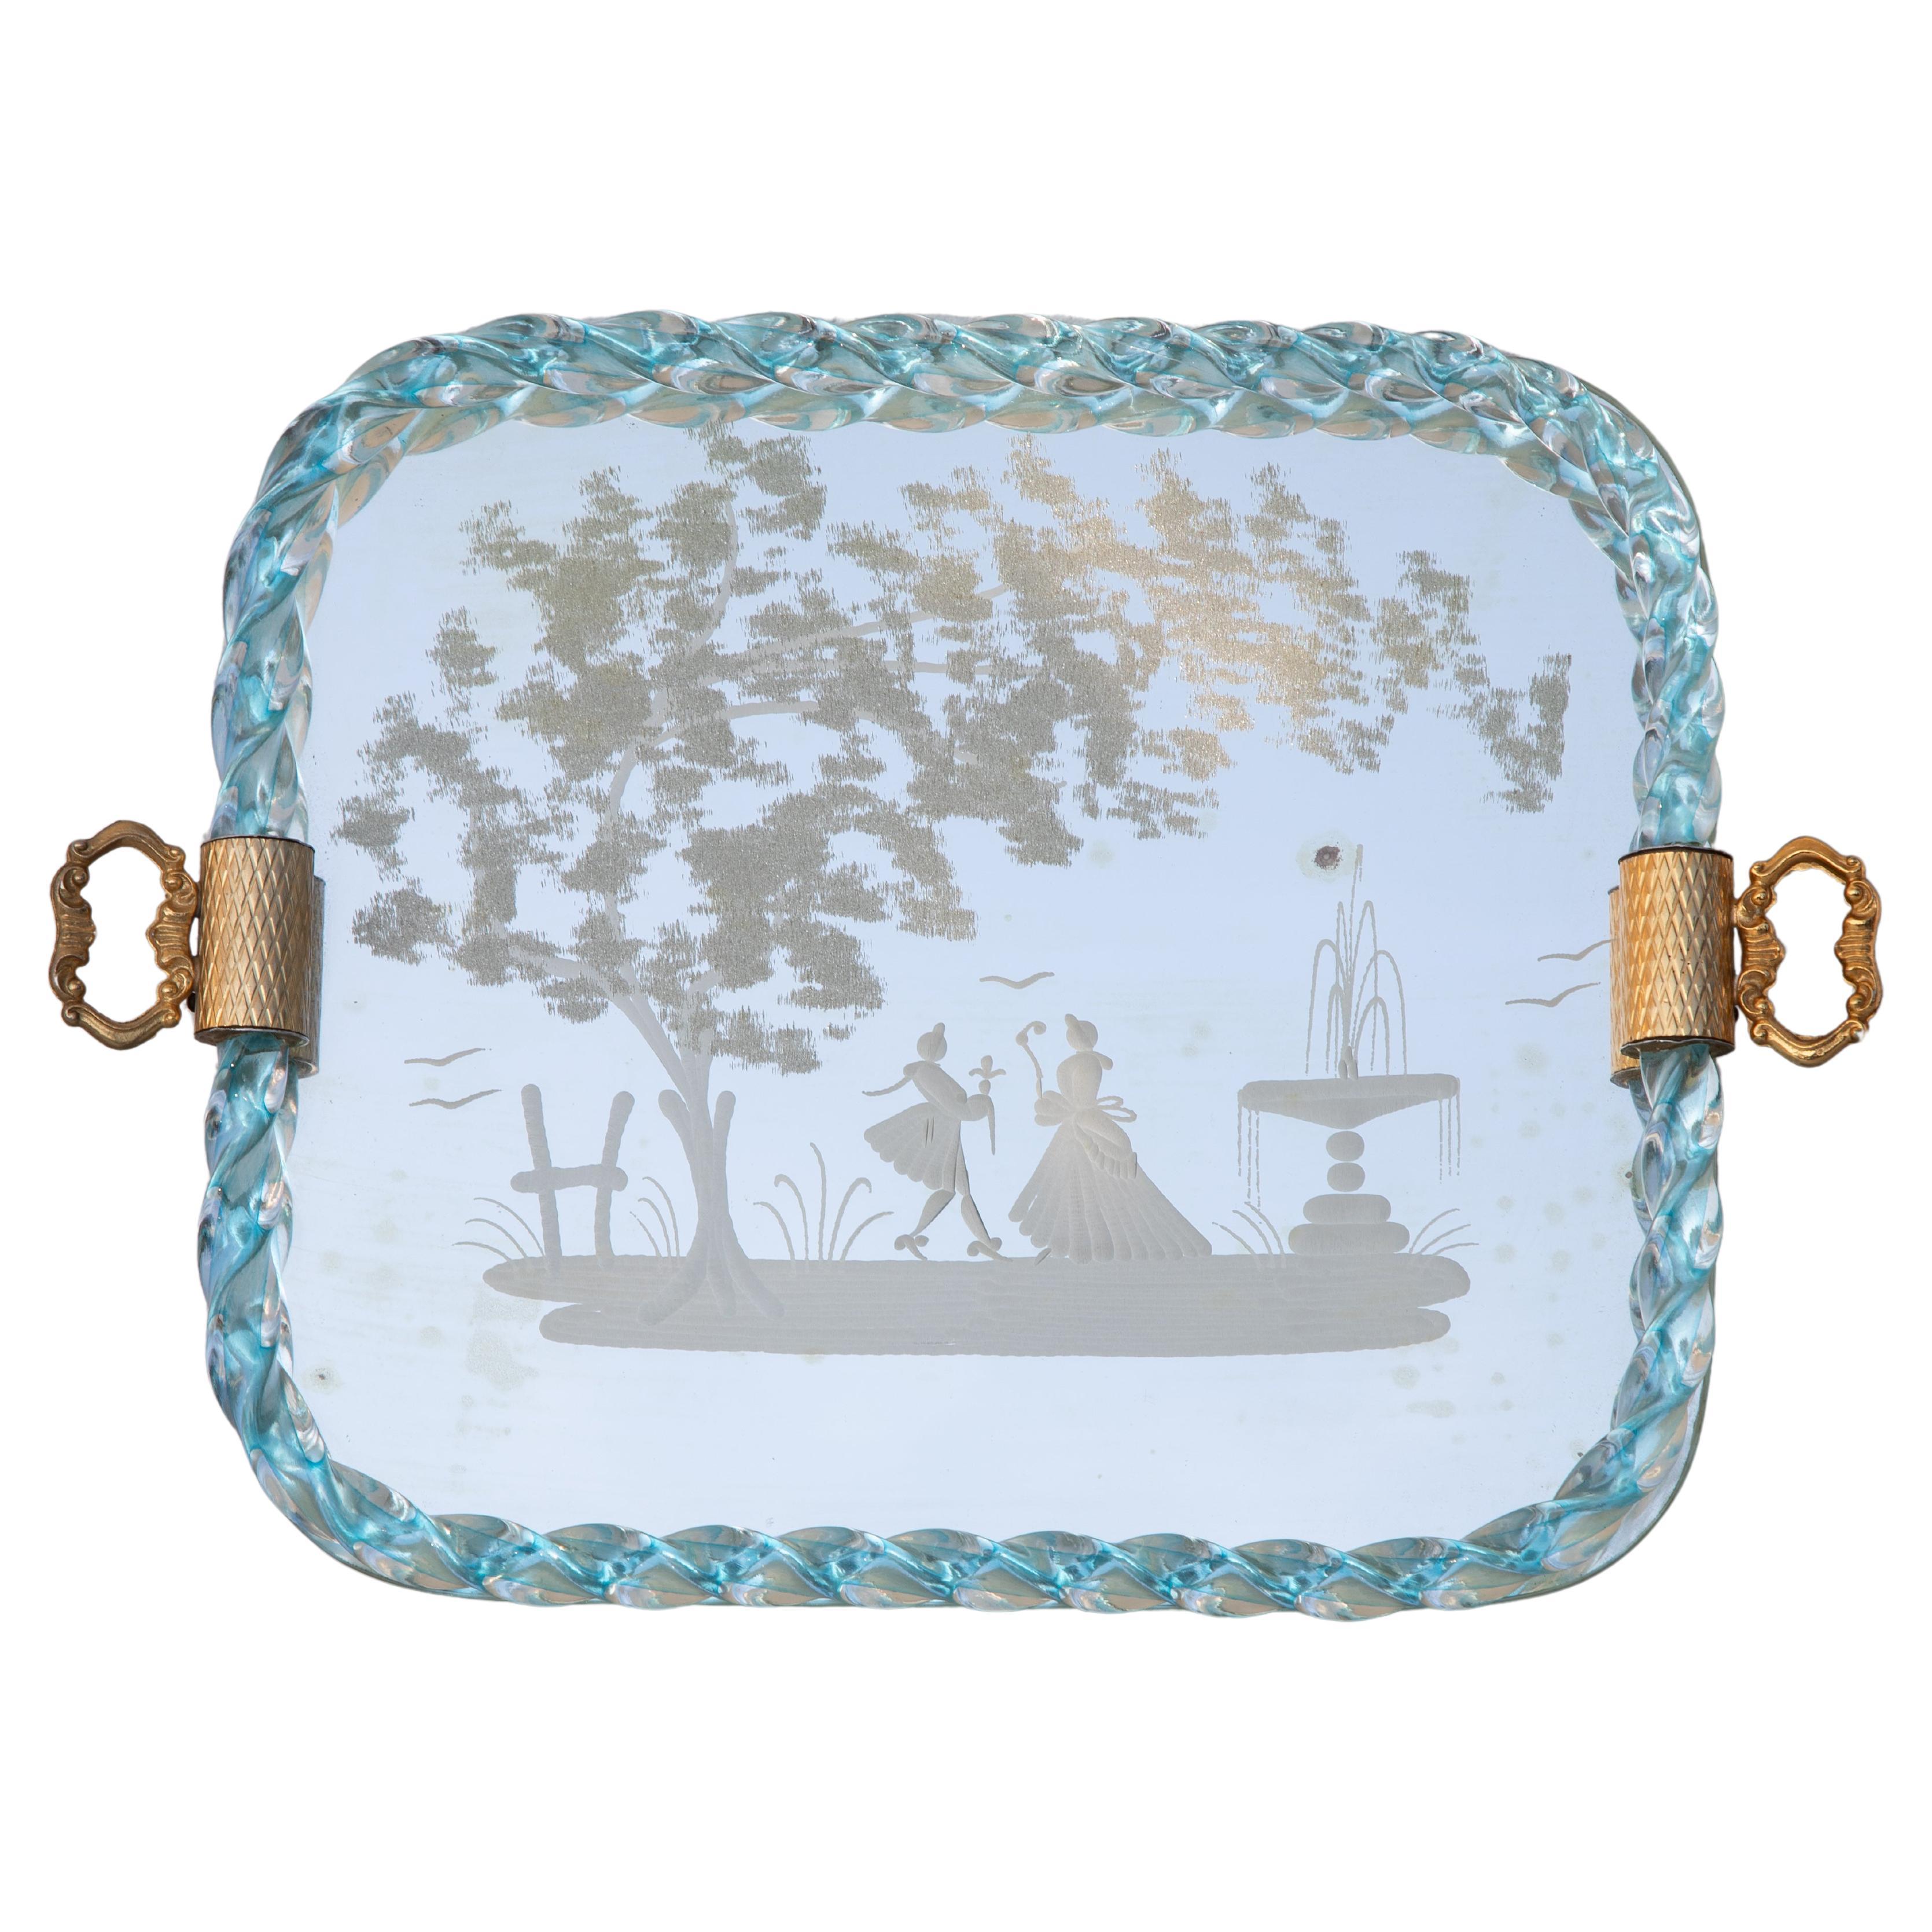 Ercole Barovier Mirror-Engraved Murano Glass Italian Serving Tray, 1940s For Sale